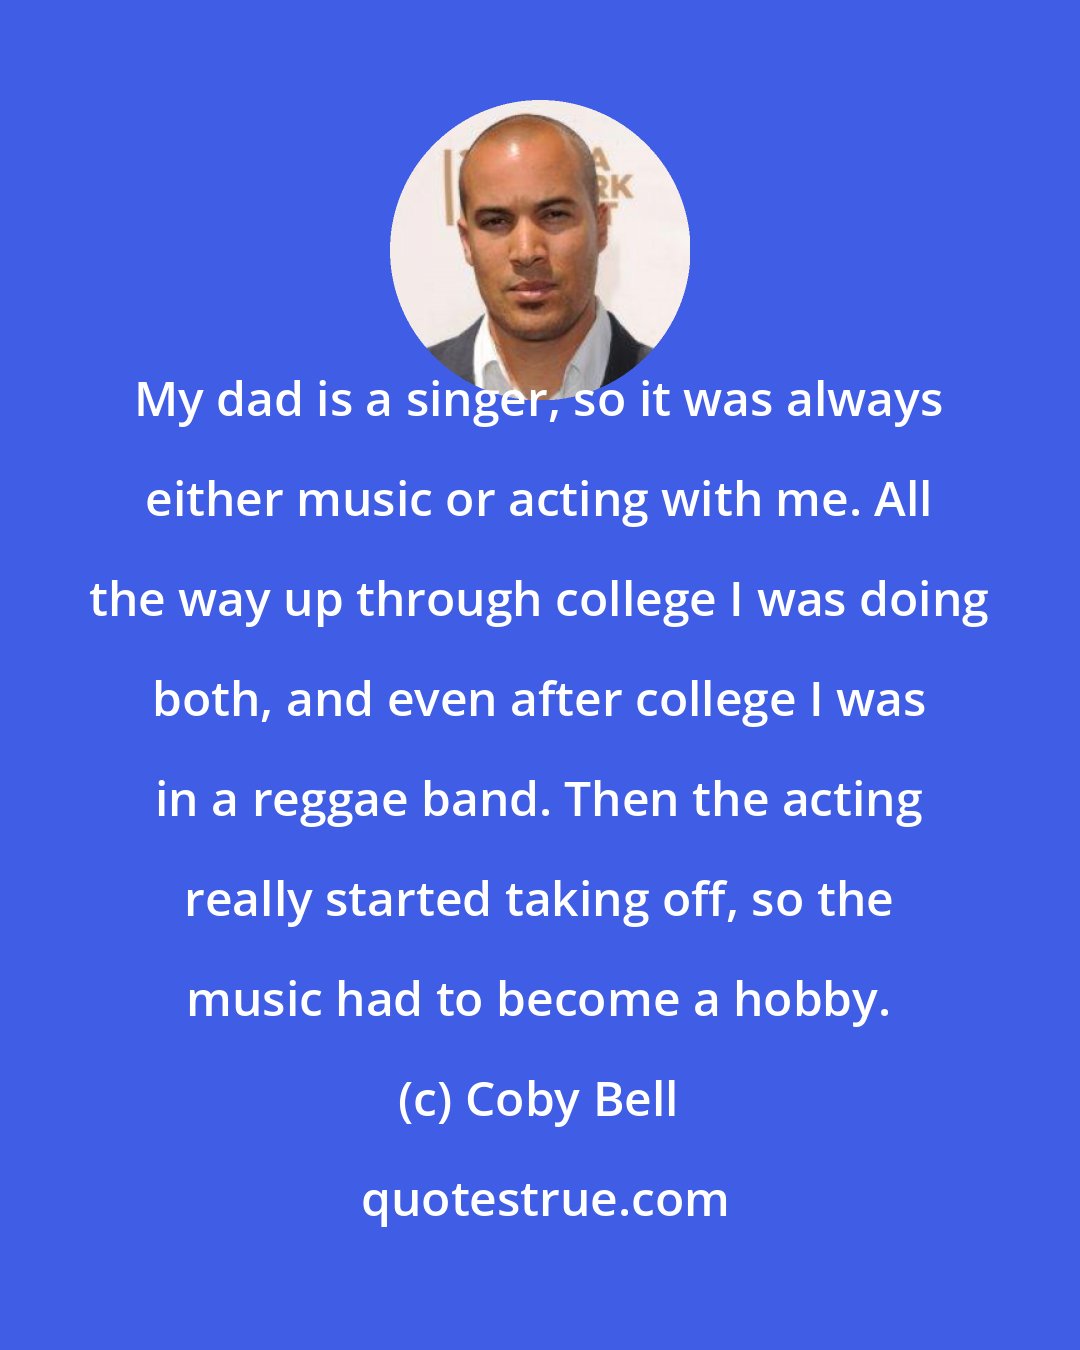 Coby Bell: My dad is a singer, so it was always either music or acting with me. All the way up through college I was doing both, and even after college I was in a reggae band. Then the acting really started taking off, so the music had to become a hobby.